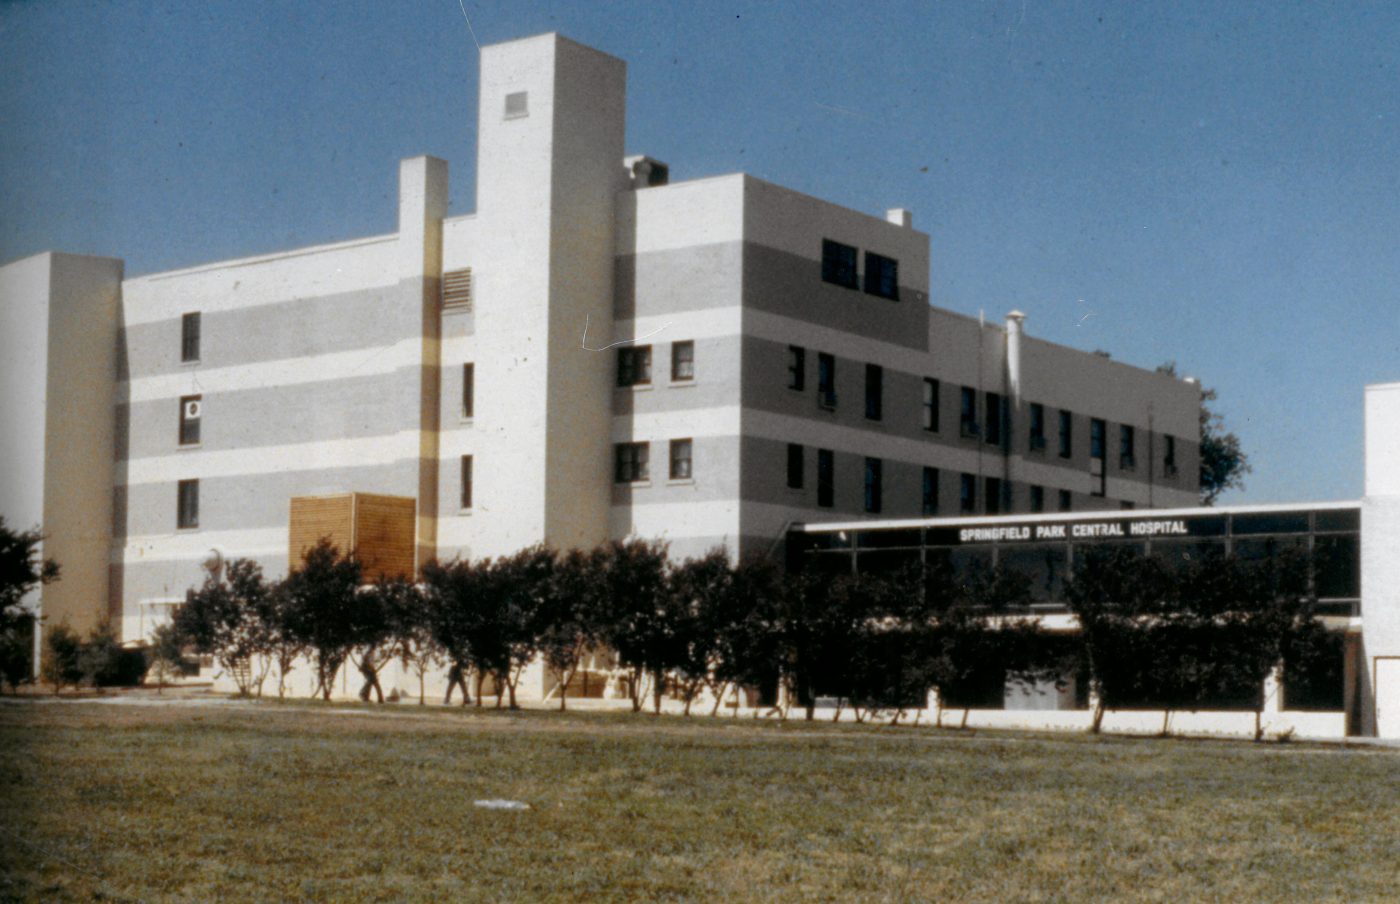 Outside of Building from 1982